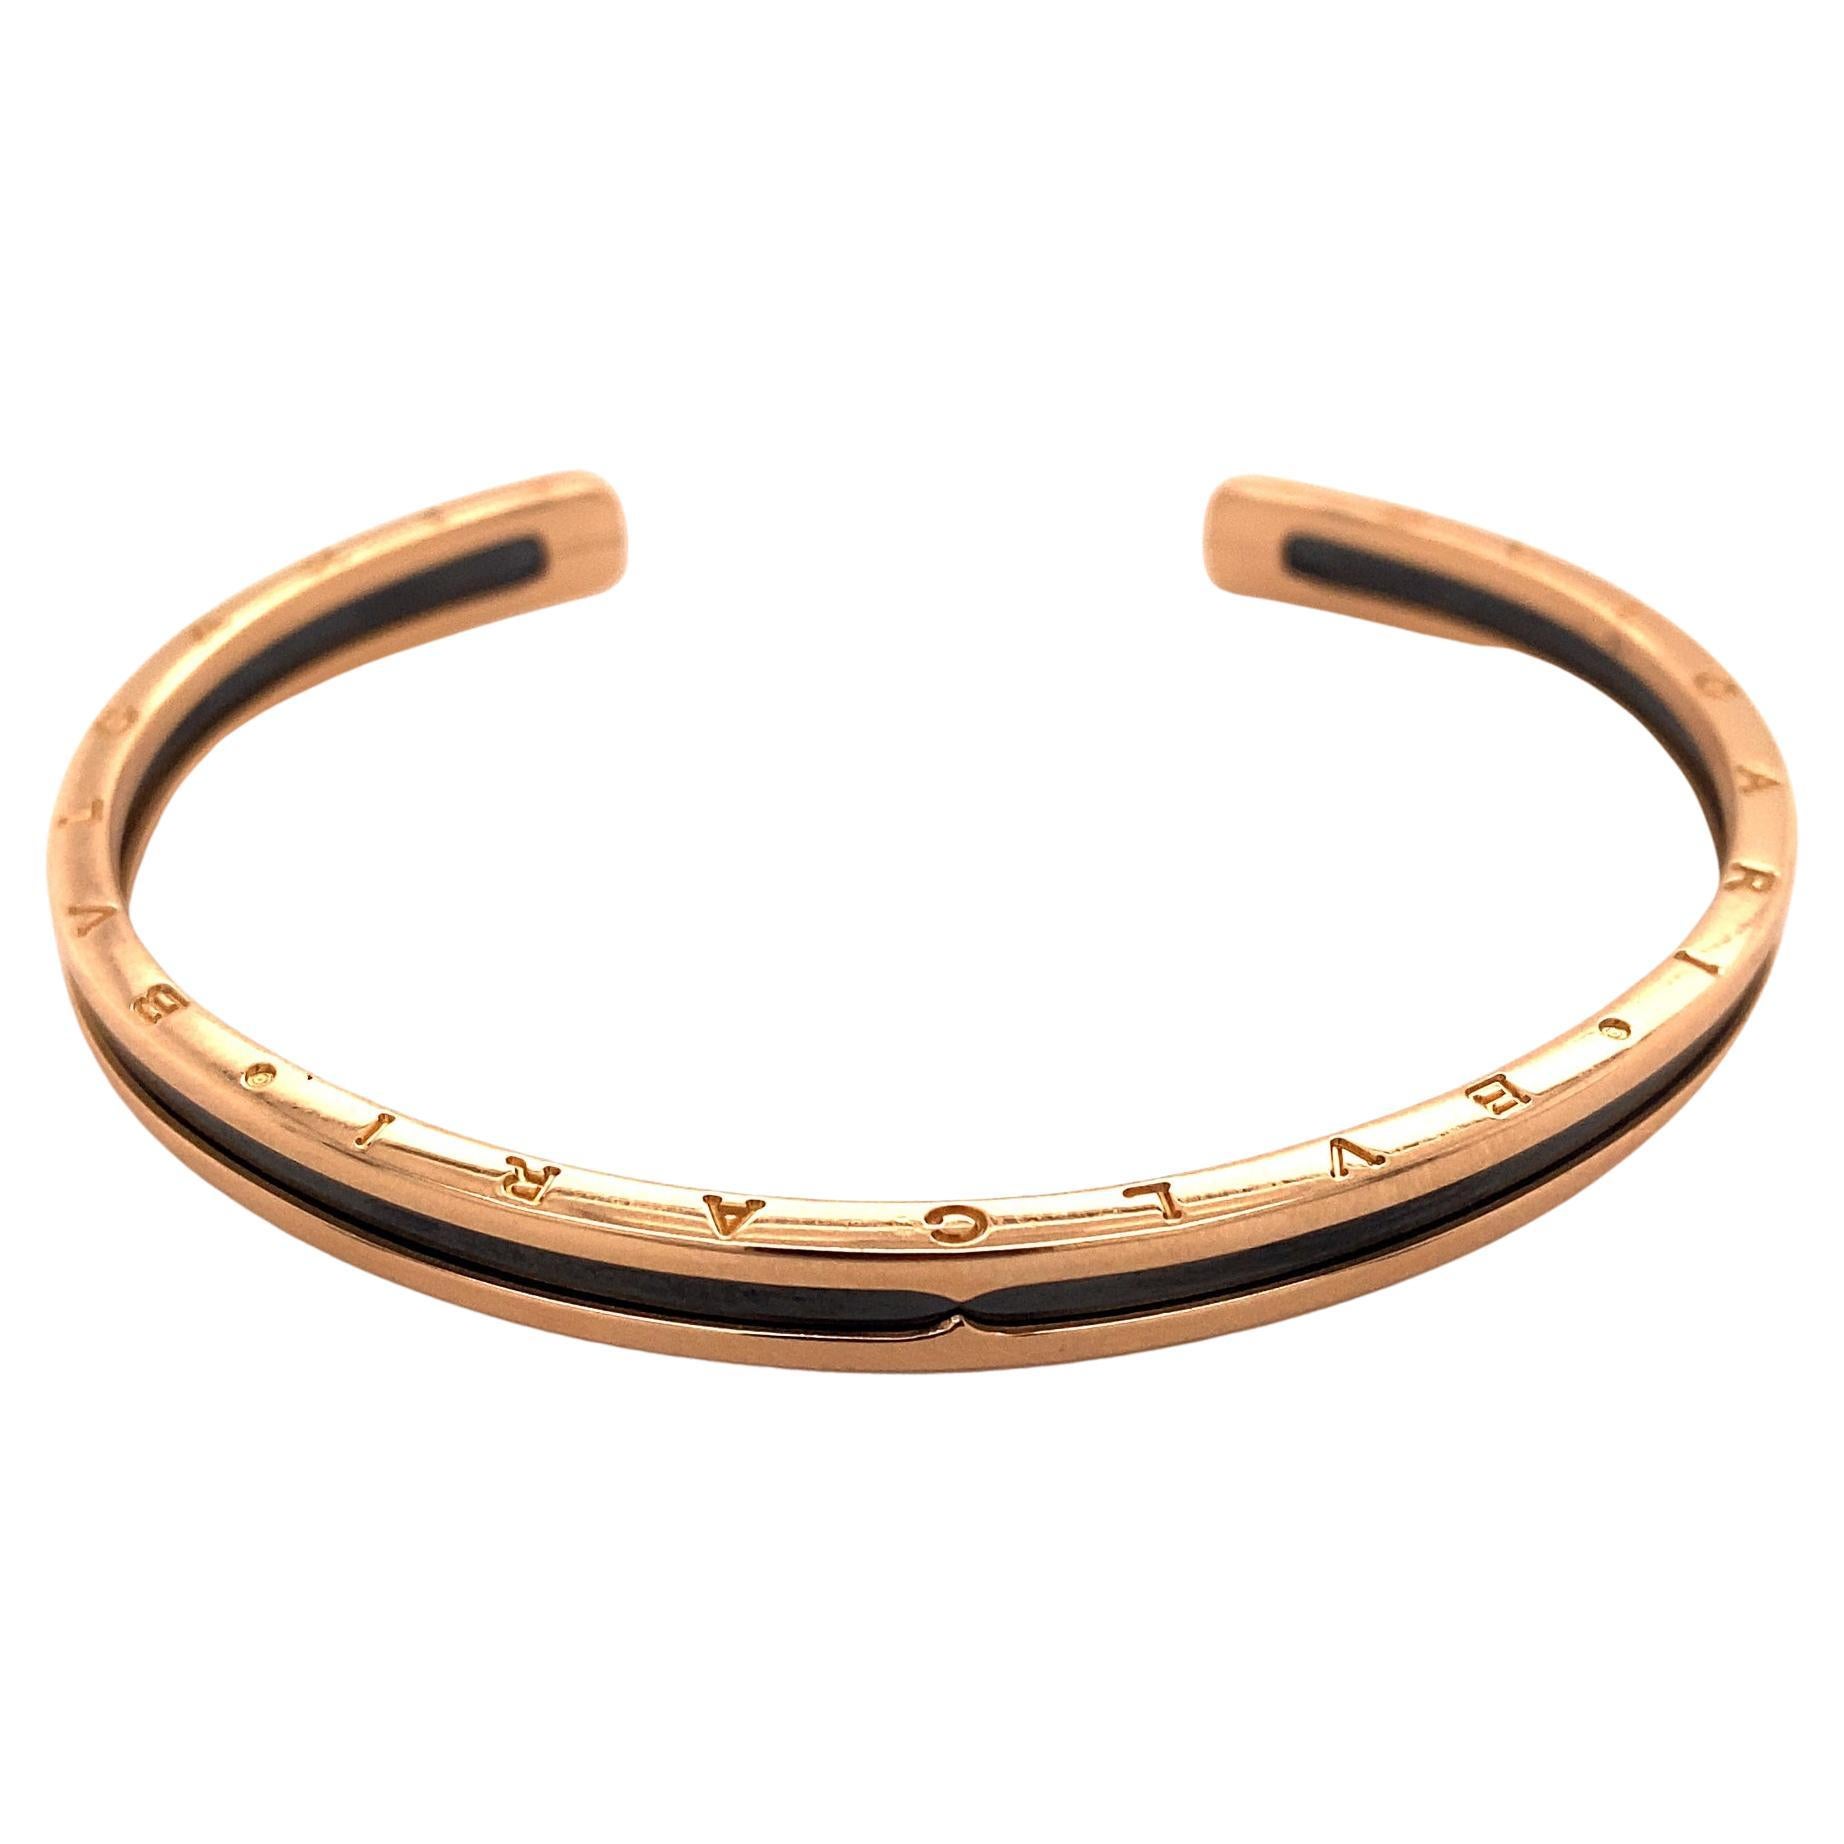 Bvlgari B-Zero1 18K Rose Gold and Stainless Steel Bangle For Sale